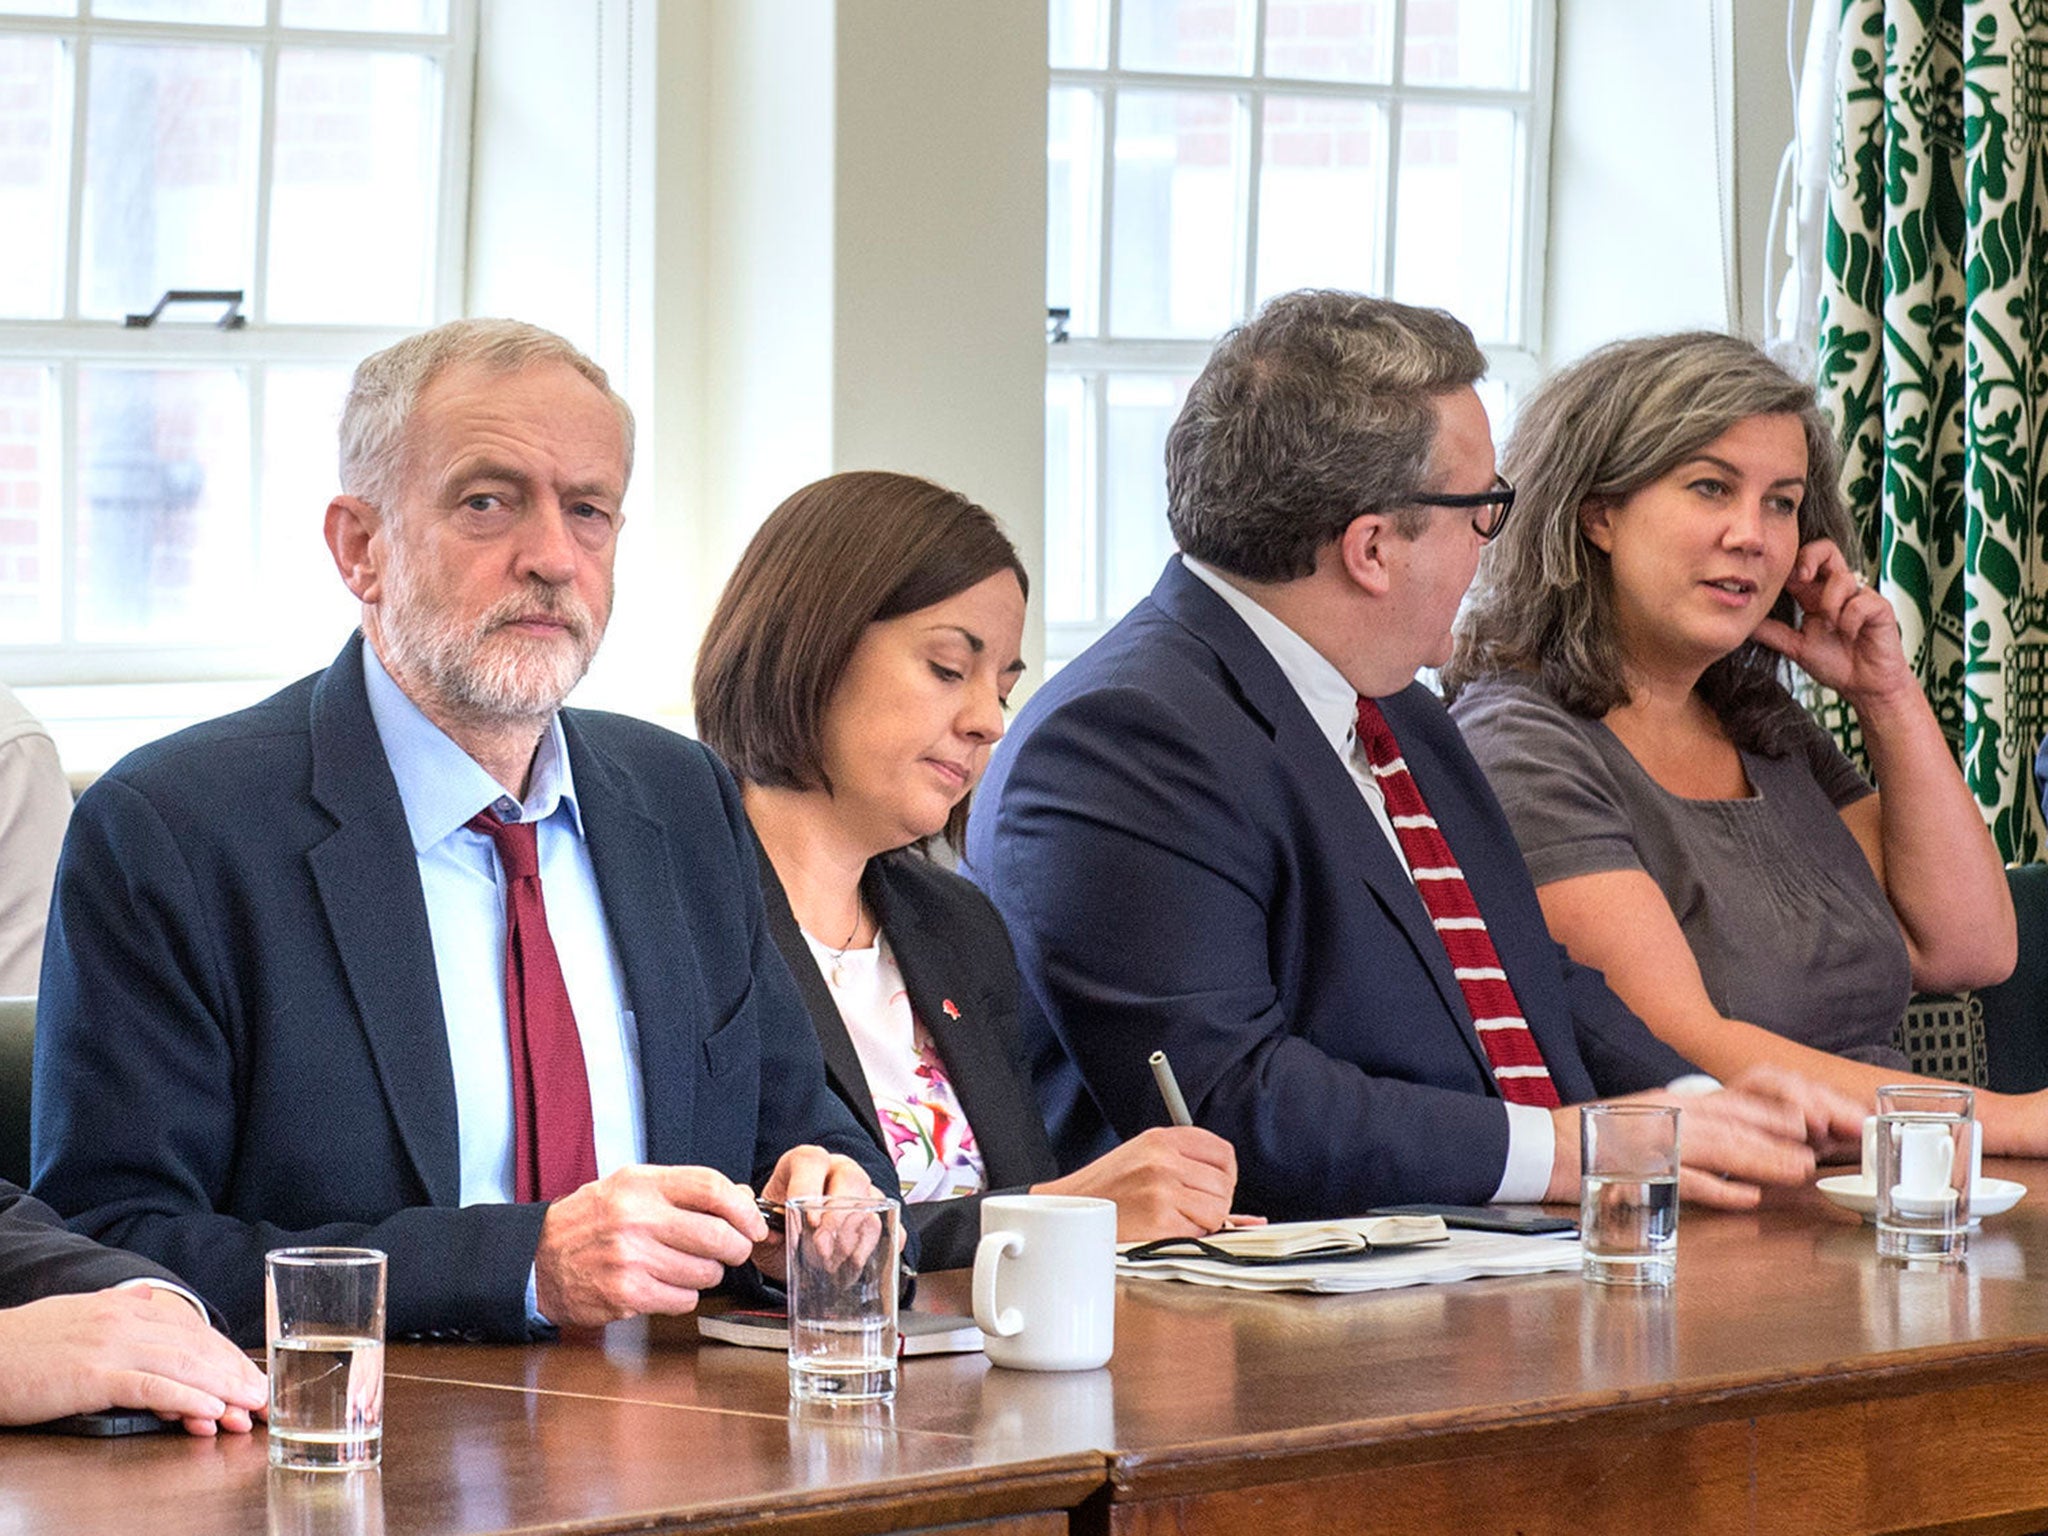 From left to right: Labour leader Jeremy Corbyn, Scottish Labour Party leader Kezia Dugdale, deputy leader Tom Watson and shadow health secretary Heidi Alexander